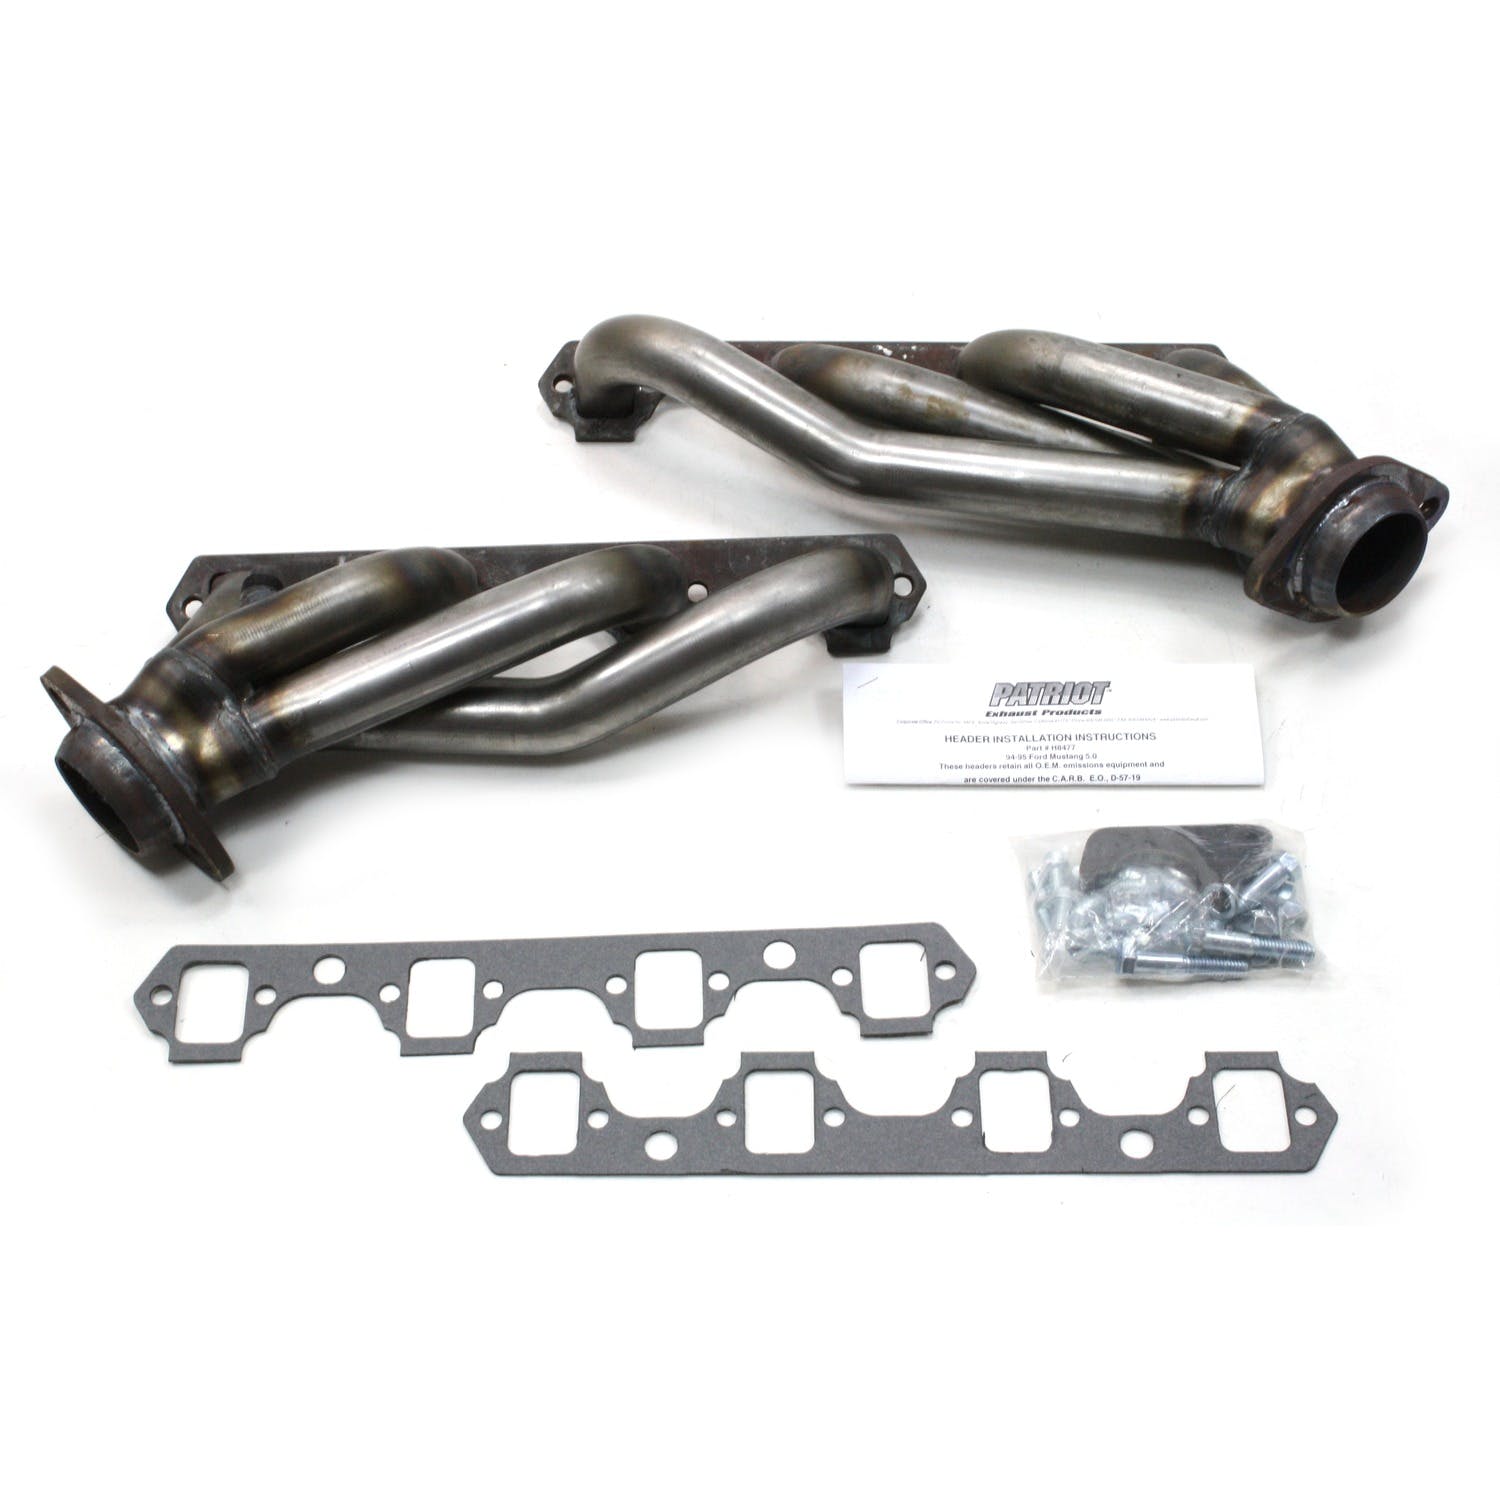 Patriot Exhaust H8477 86-93 Mustang 5.0 Emission Legal Raw